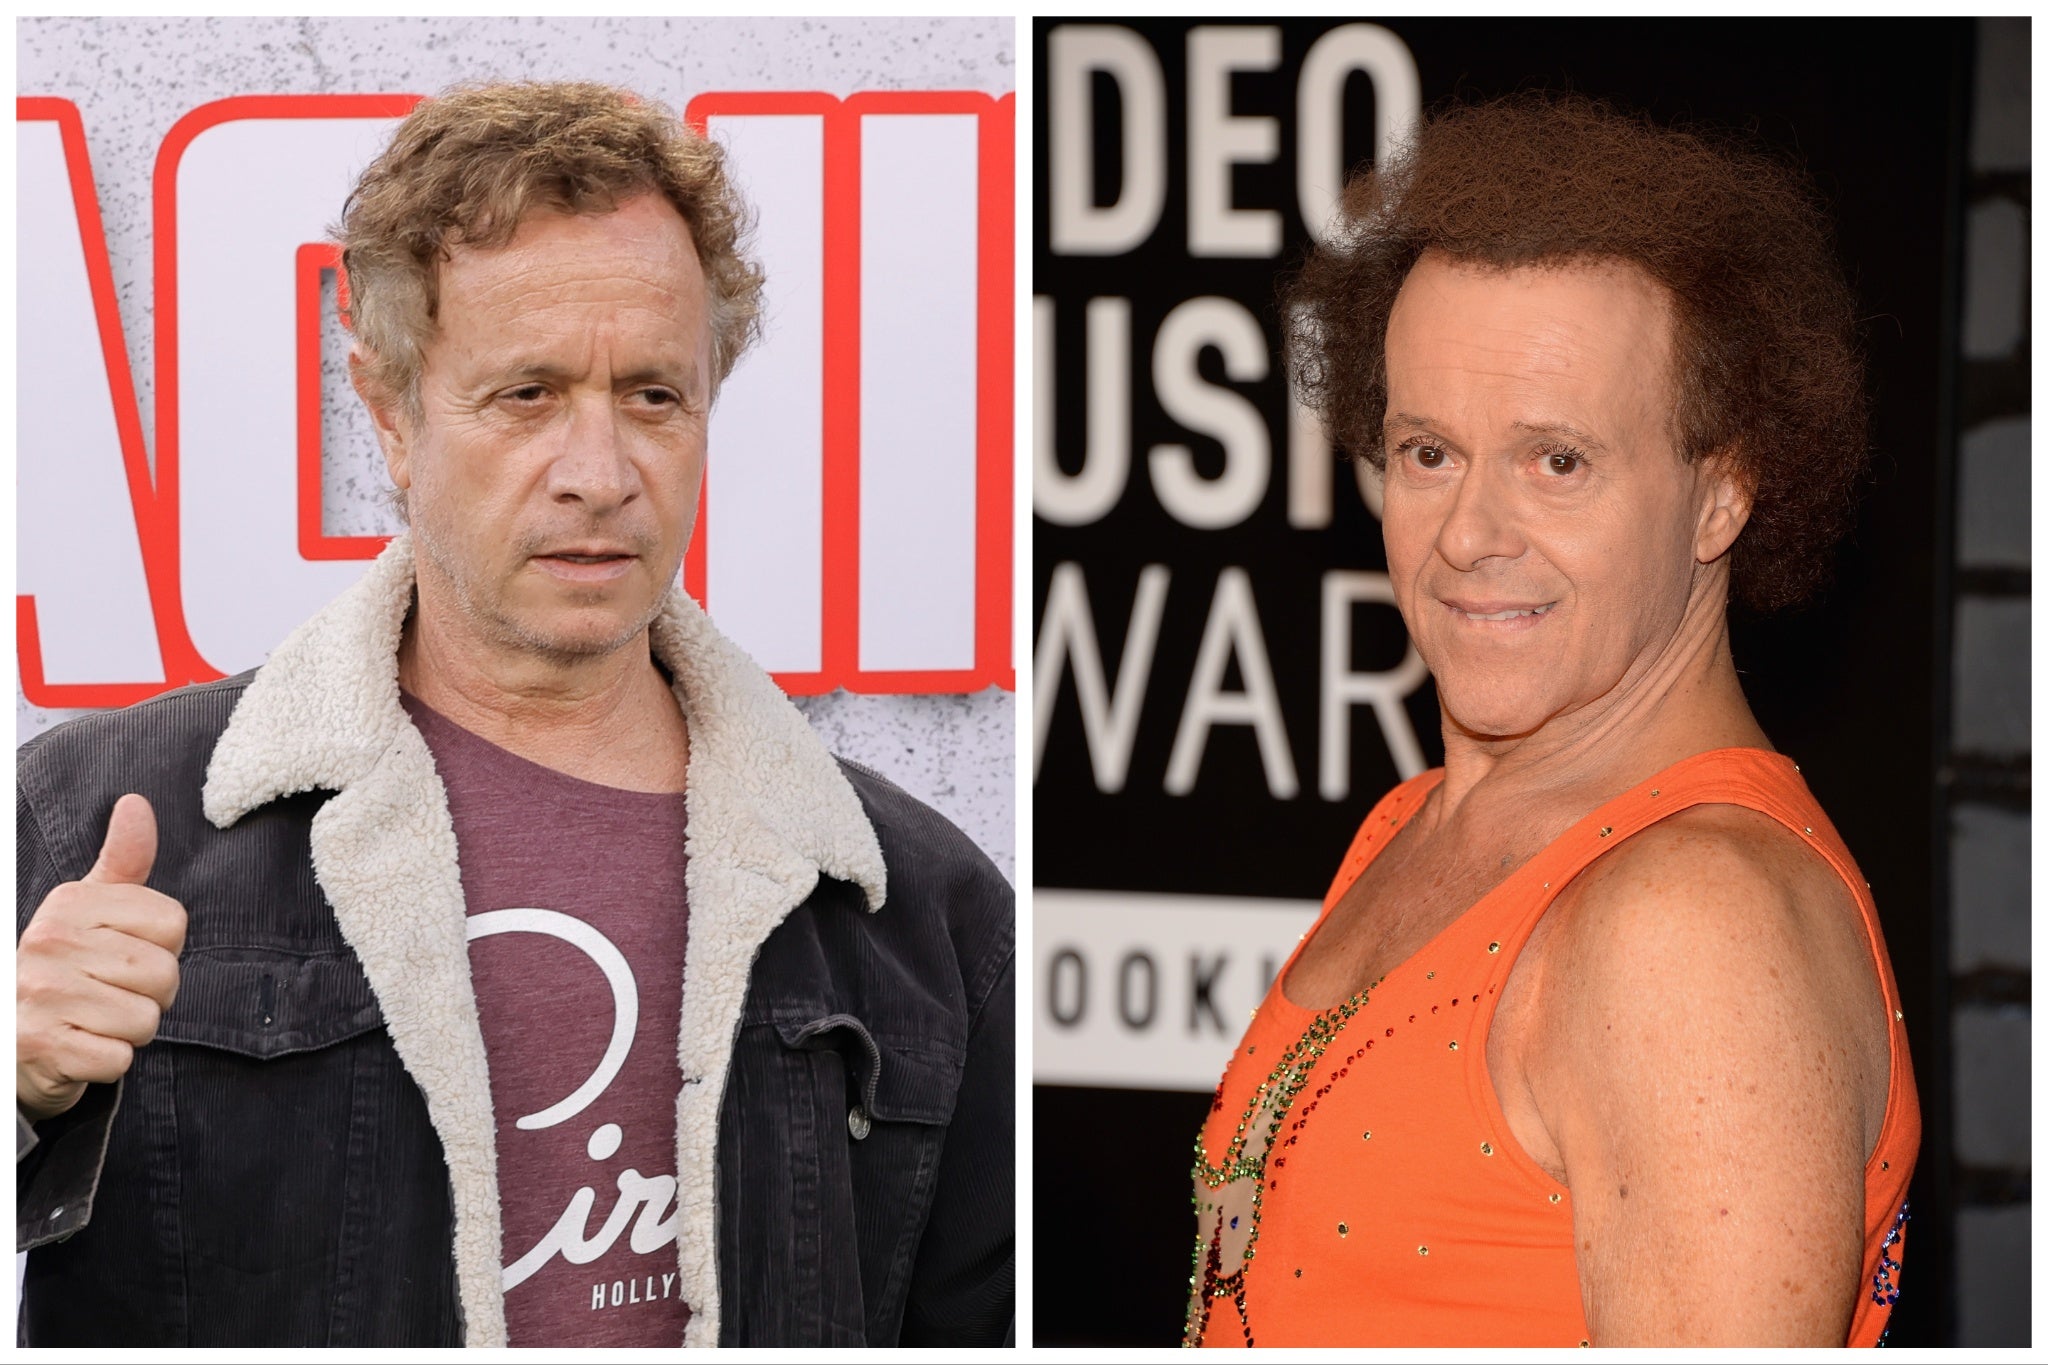 Pauly Shore (left) and Richard Simmons